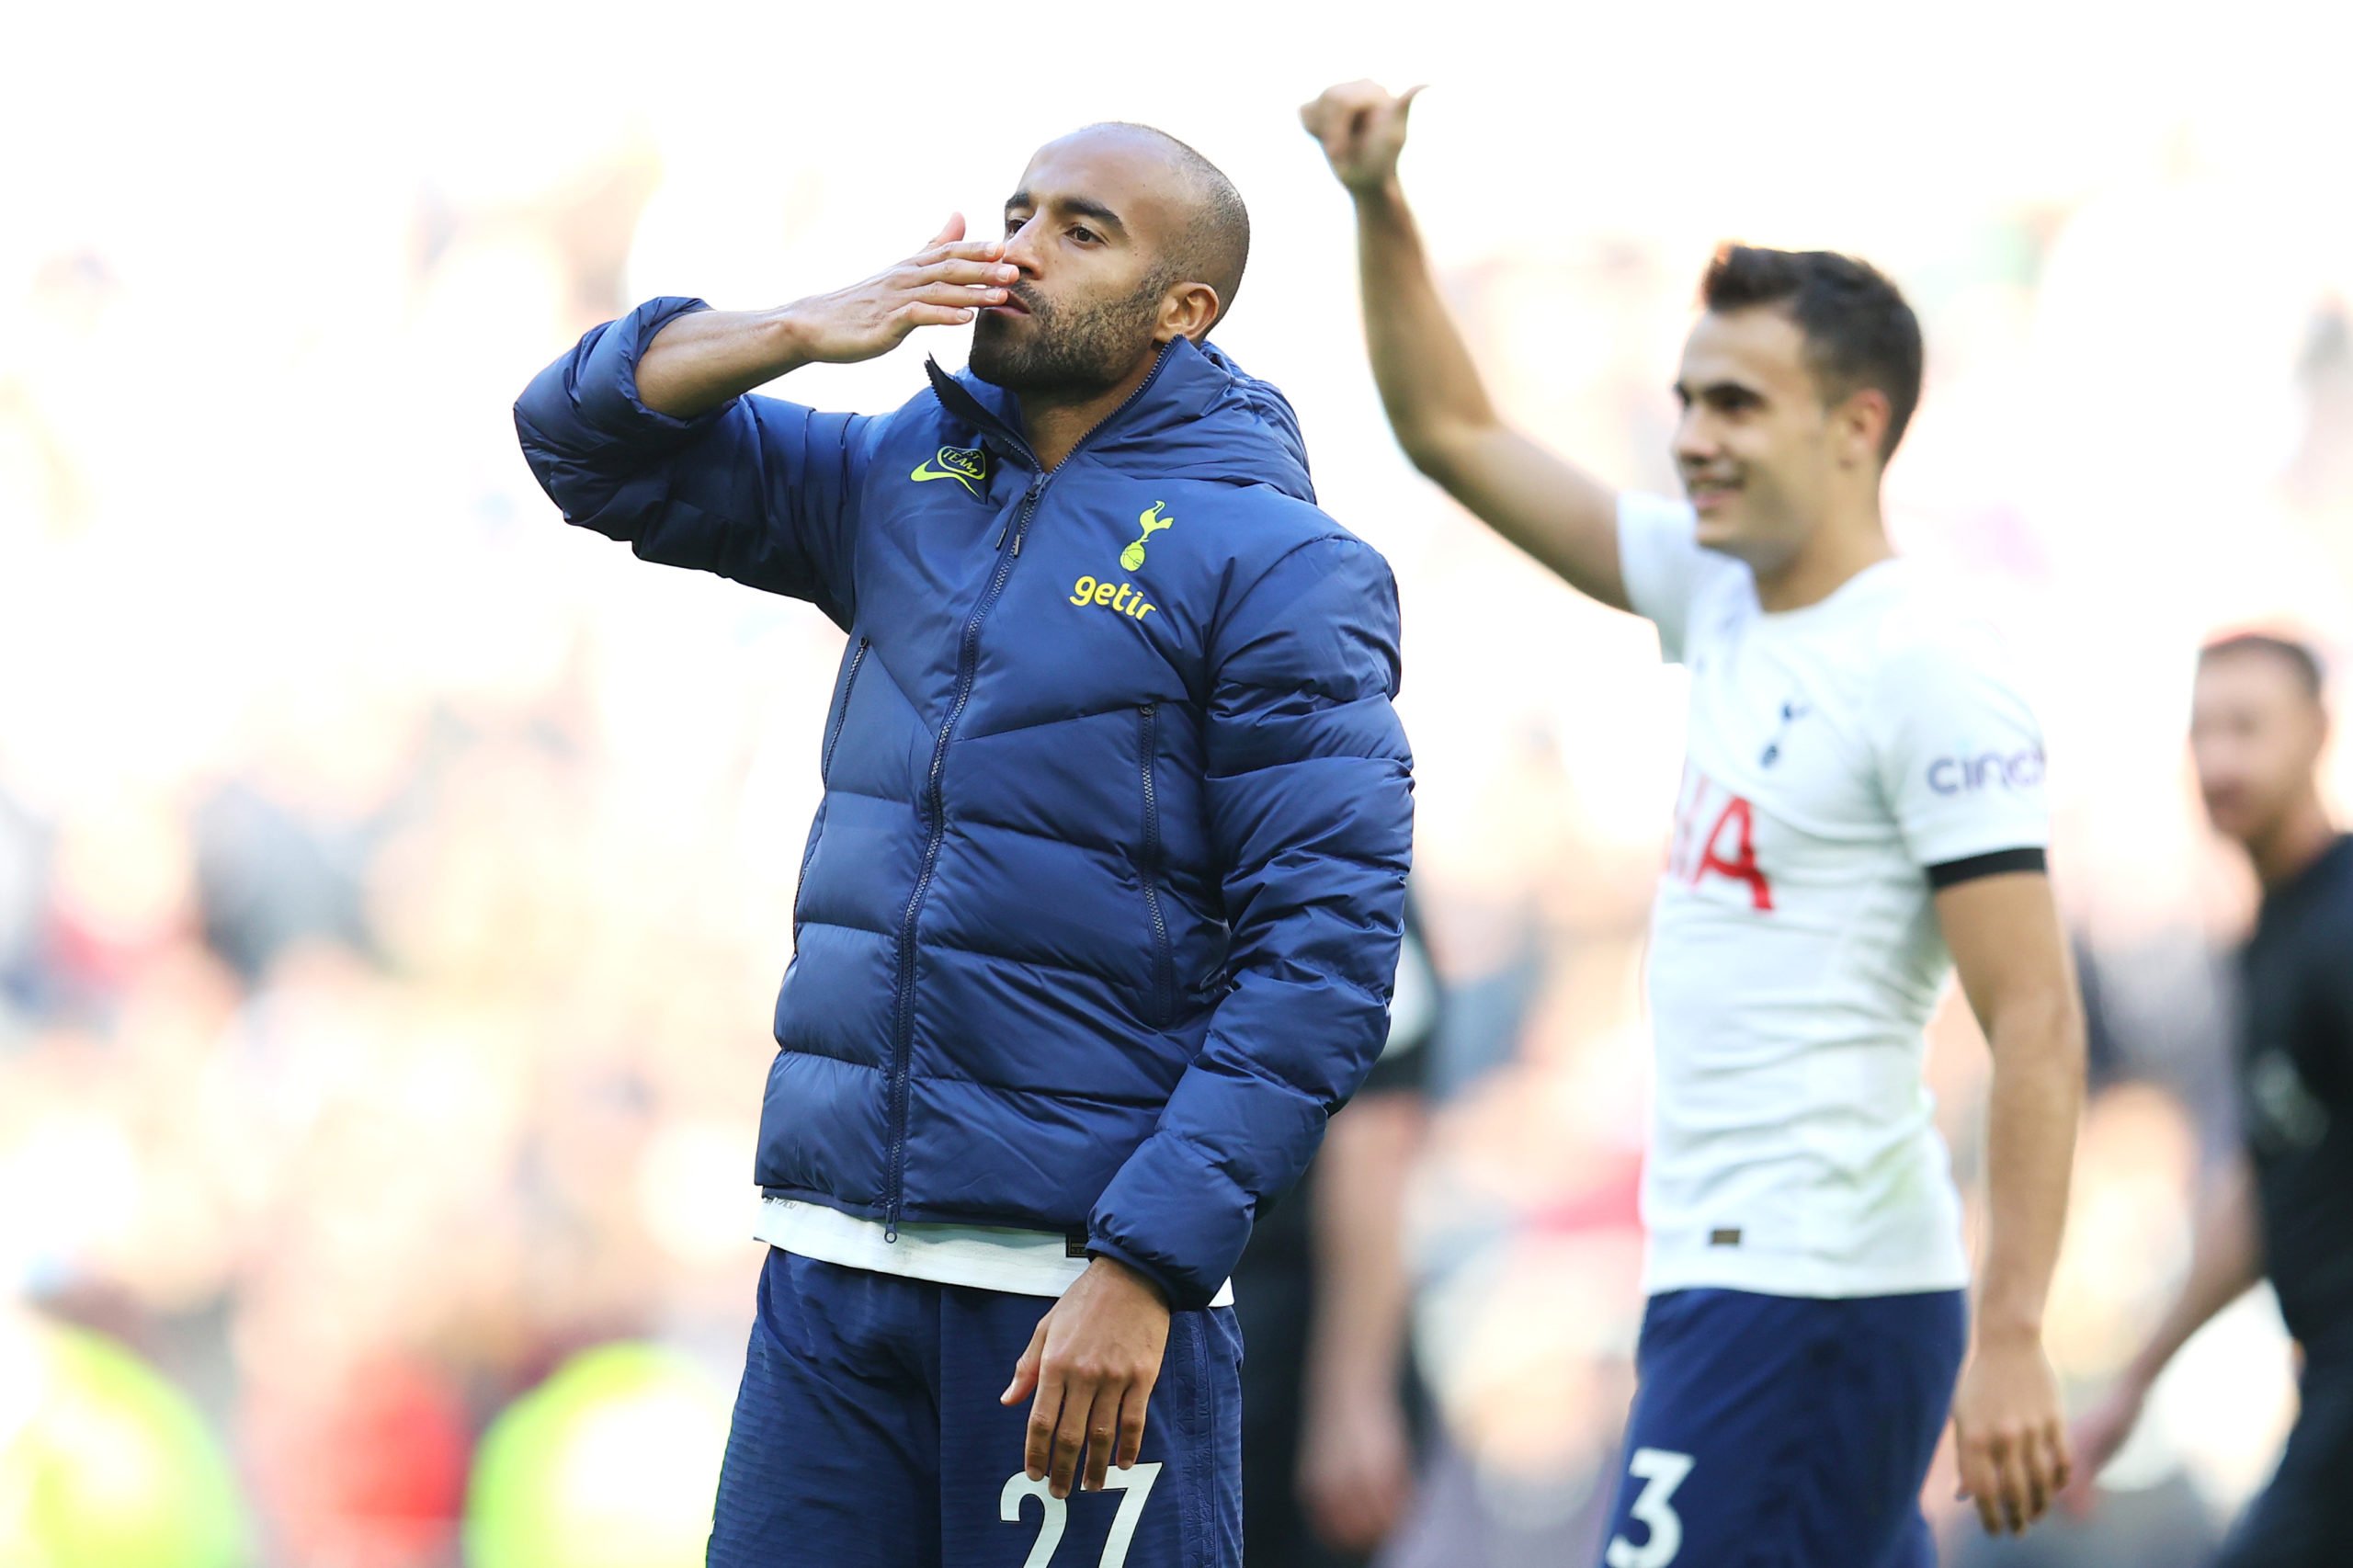 LONDON, ENGLAND - OCTOBER 03: Lucas Moura of Tottenham Hotspur acknowledges the fans following the Premier League match between Tottenham Hotspur and Aston Villa at Tottenham Hotspur Stadium on October 03, 2021 in London, England. (Photo by Catherine Ivill/Getty Images)
The 4th Official uses images provided by the following image agency: Getty Images (https://www.gettyimages.de/) Imago Images (https://www.imago-images.de/)